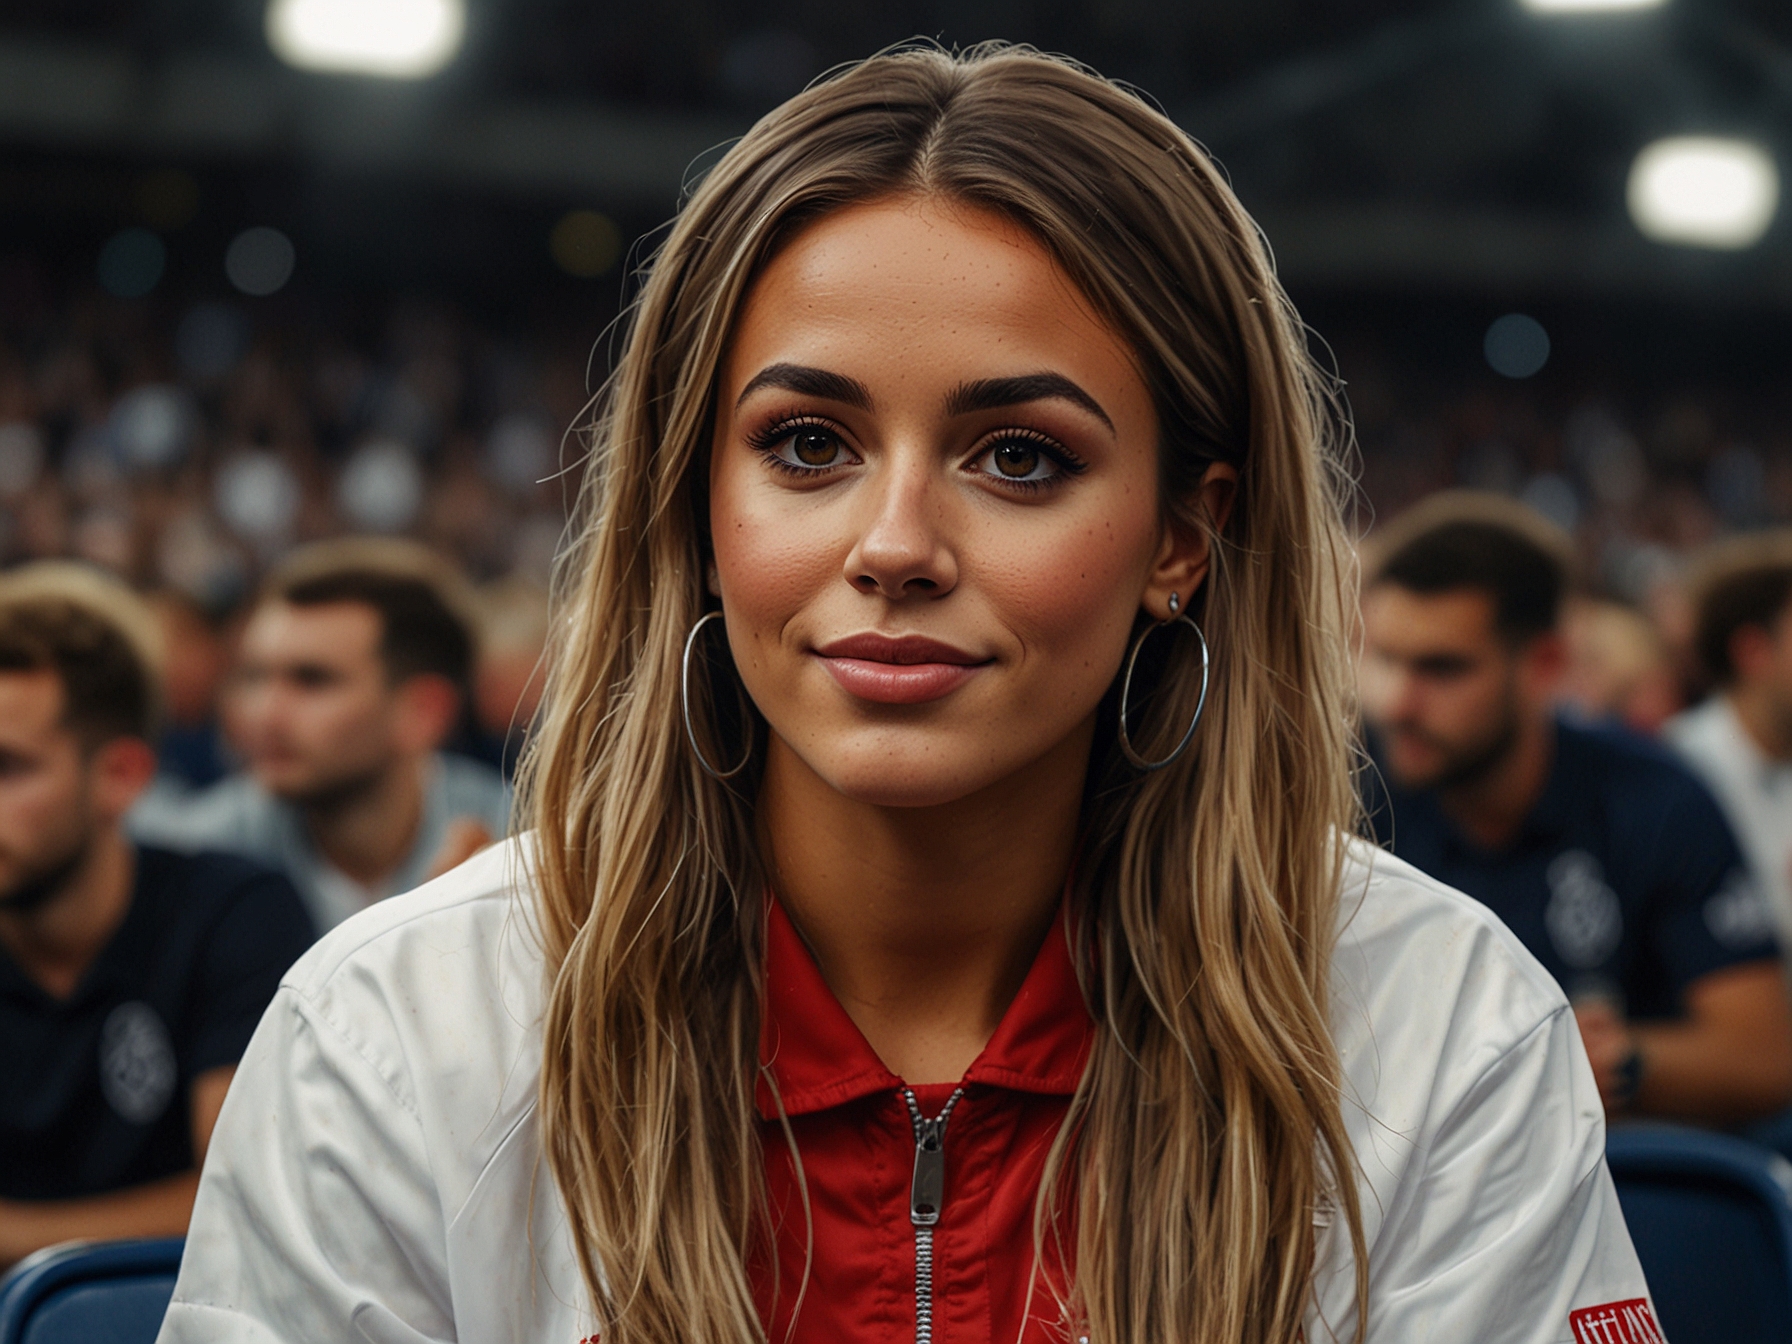 Lauryn Goodman seen attending a public event, showcasing her strong personality and social media influence, adding complexity to her relationship with Kyle Walker and the upcoming Euros 2024 tension.